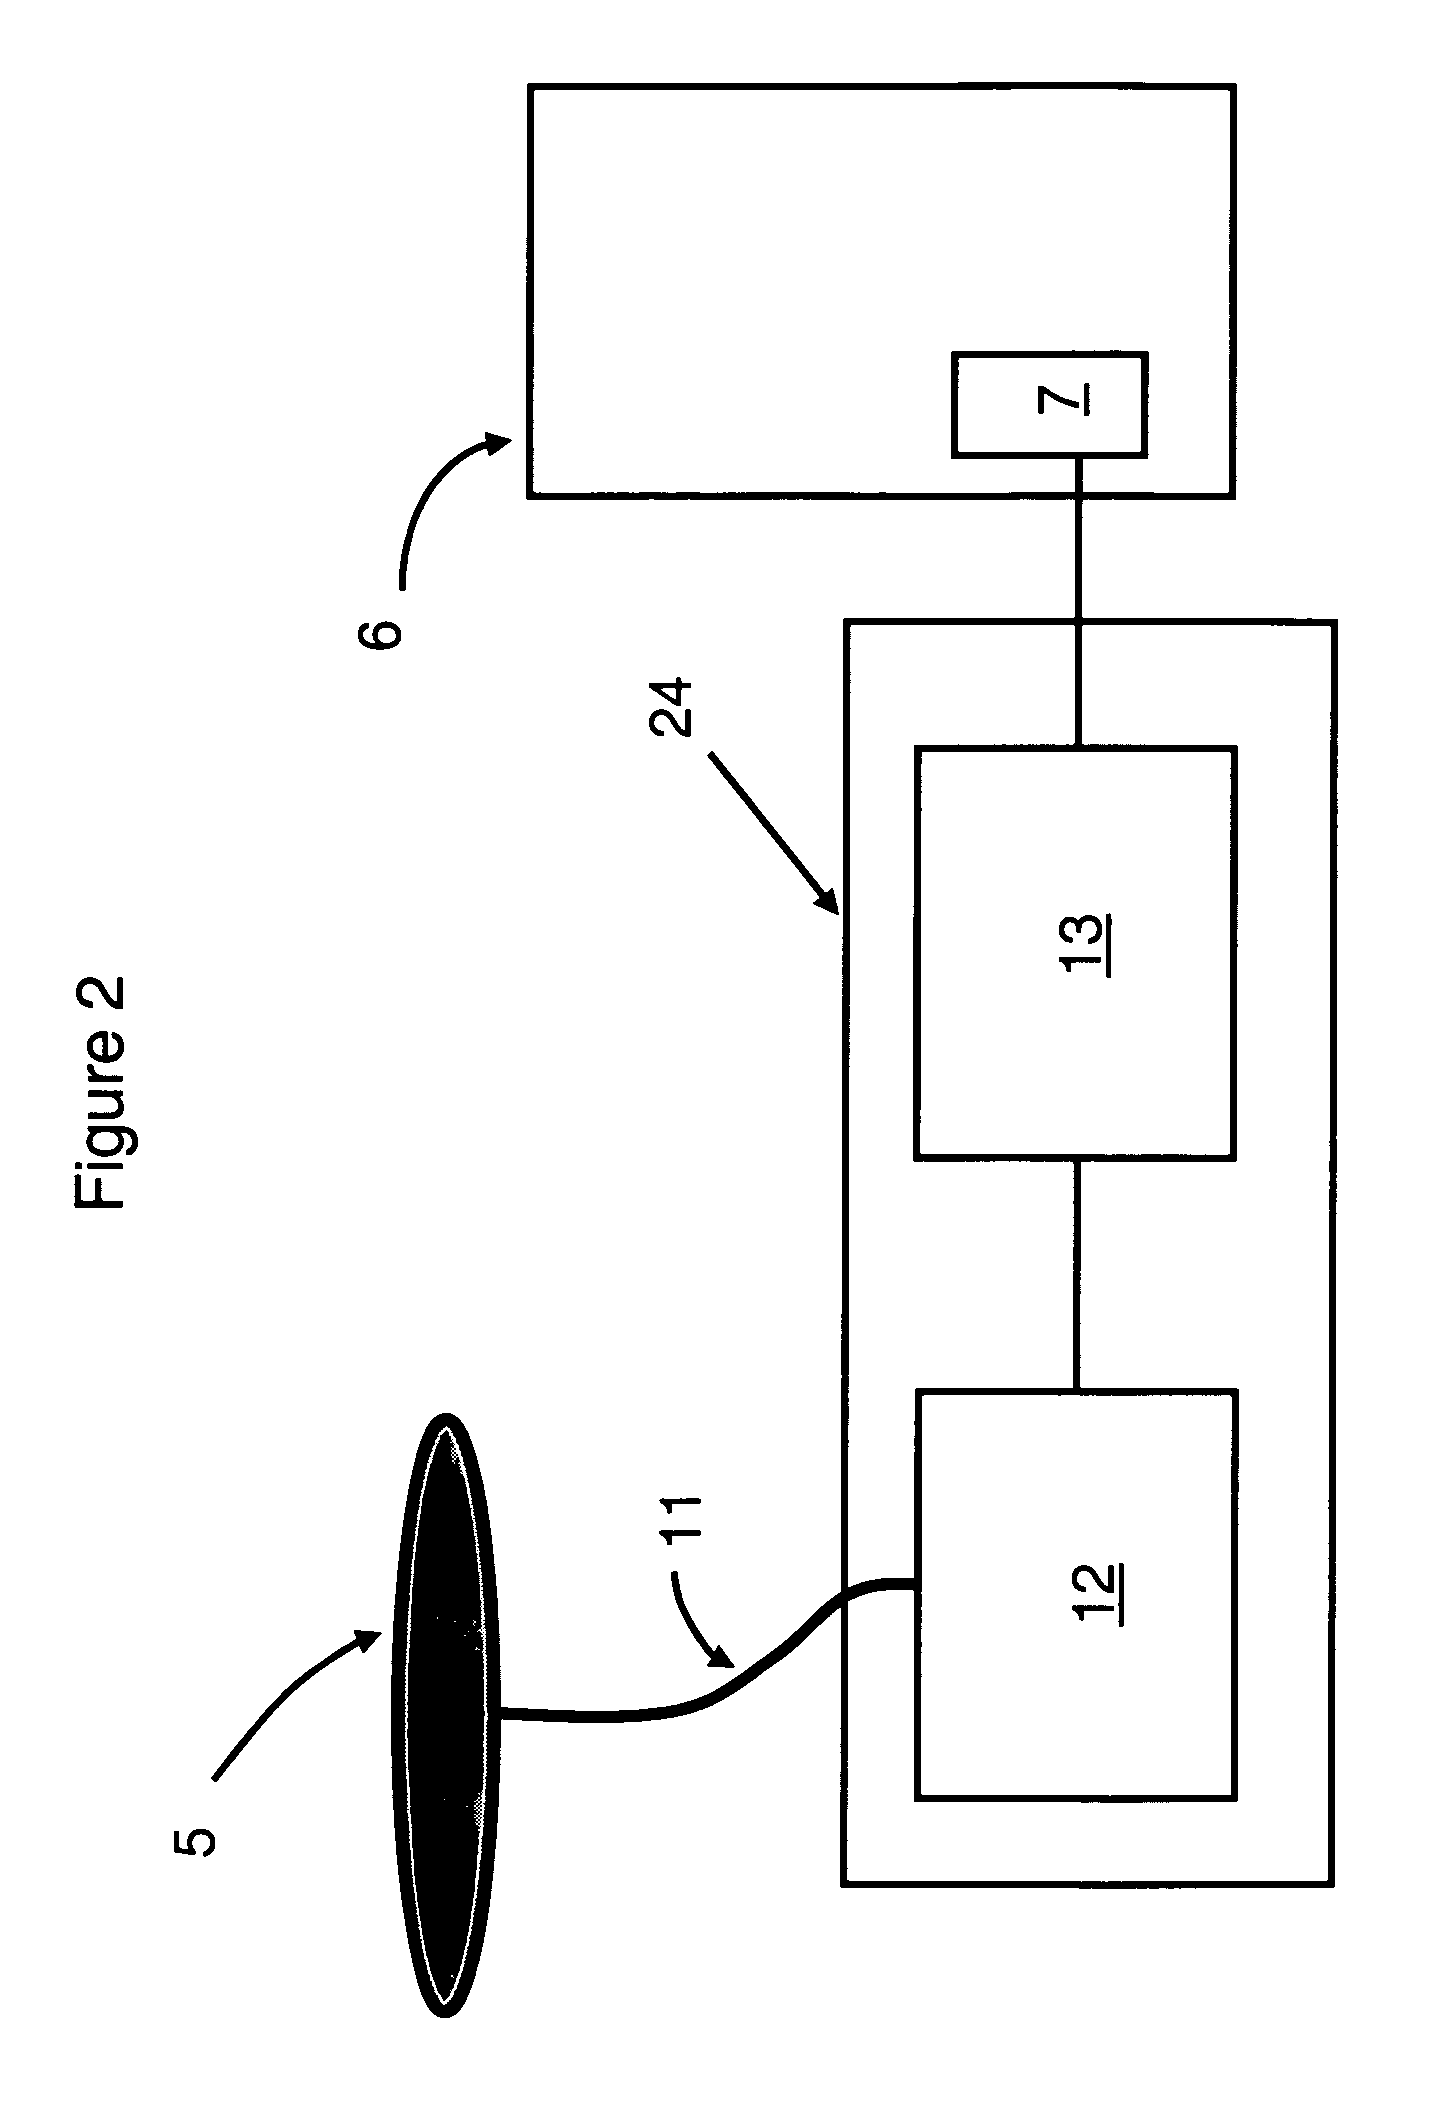 Remote sensor for controlling ionization systems